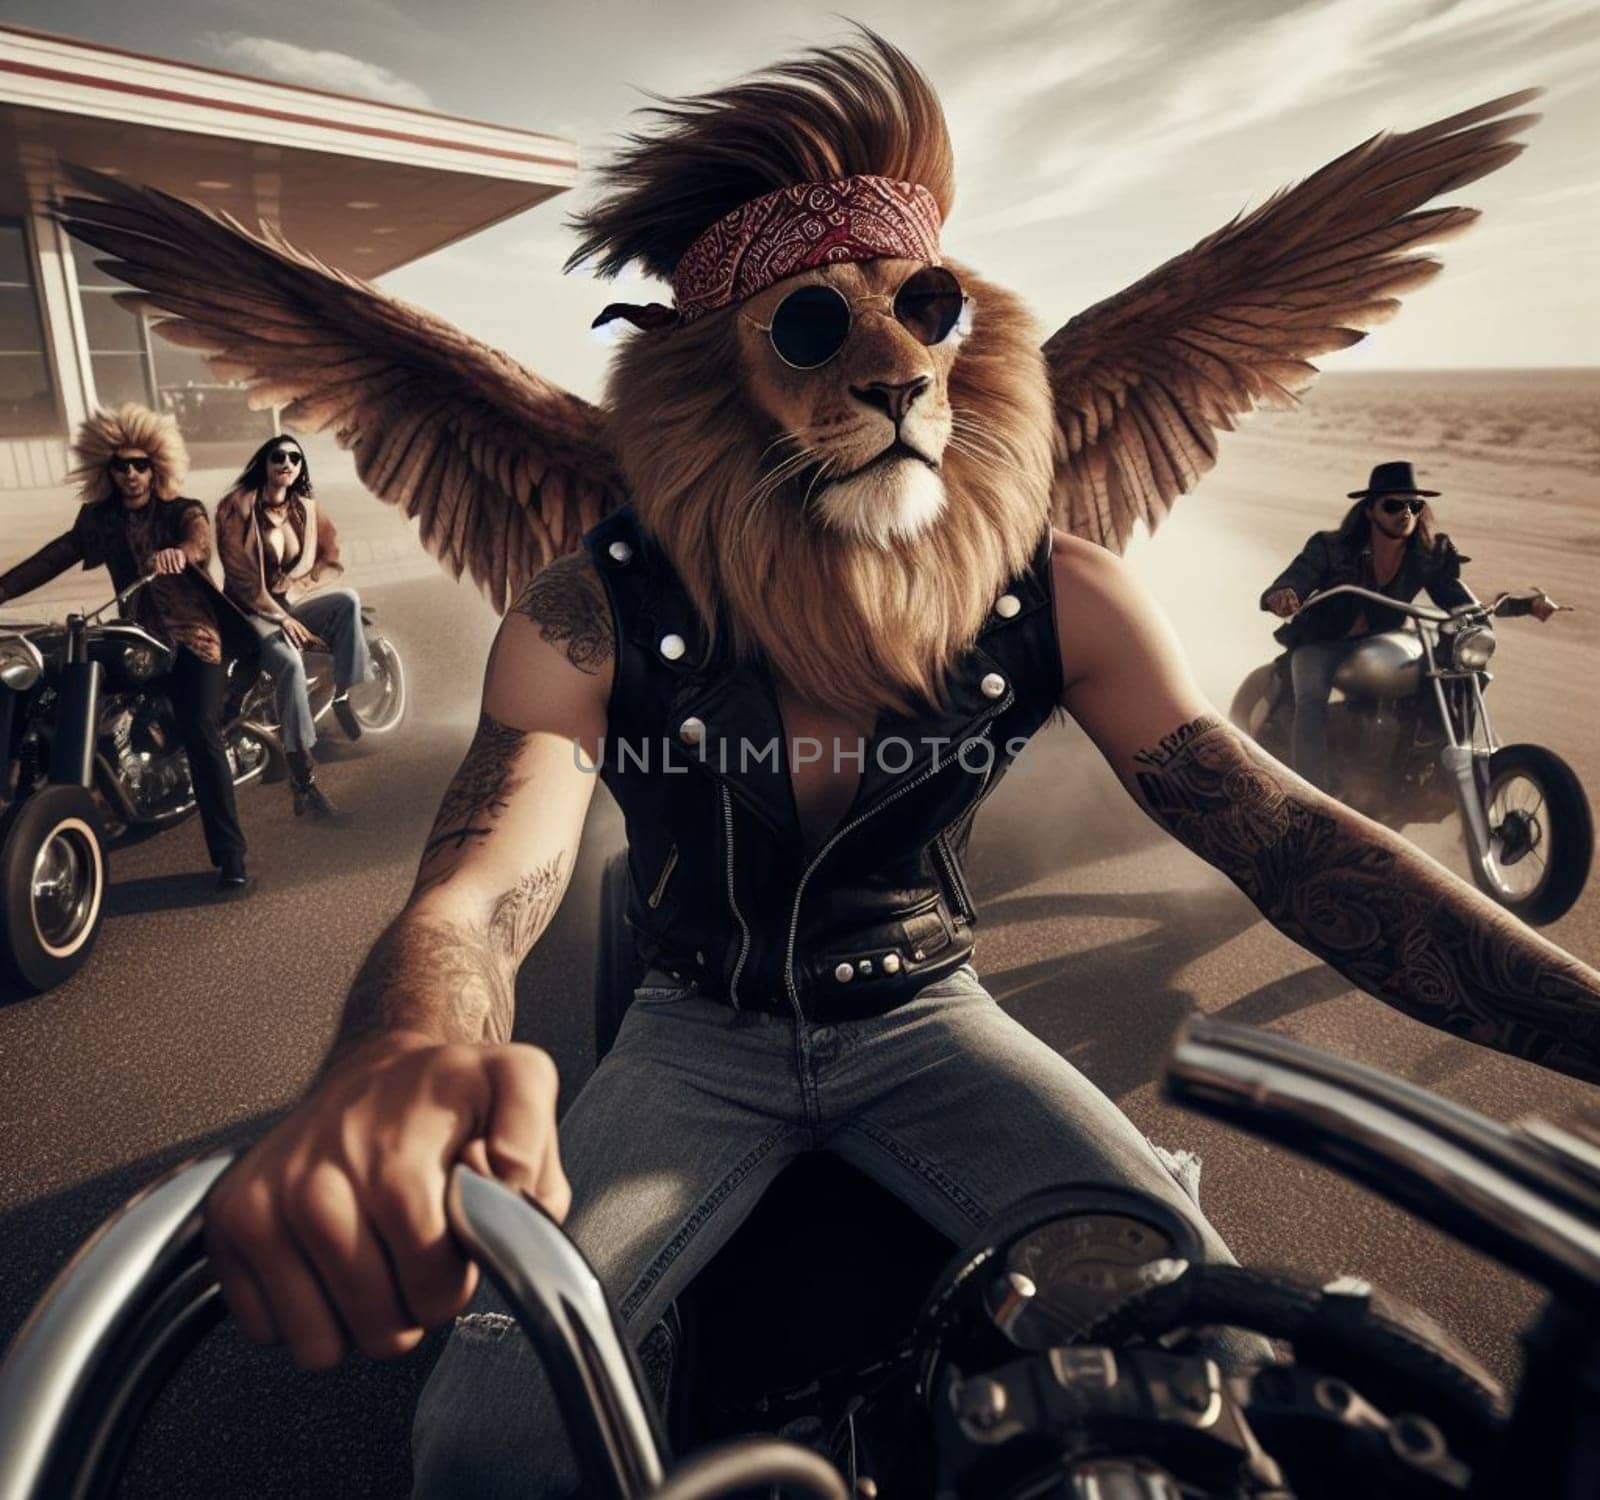 anthropomorhic lion characters gang riding custom bike hotrod on the road wearing leather blue jeans by verbano